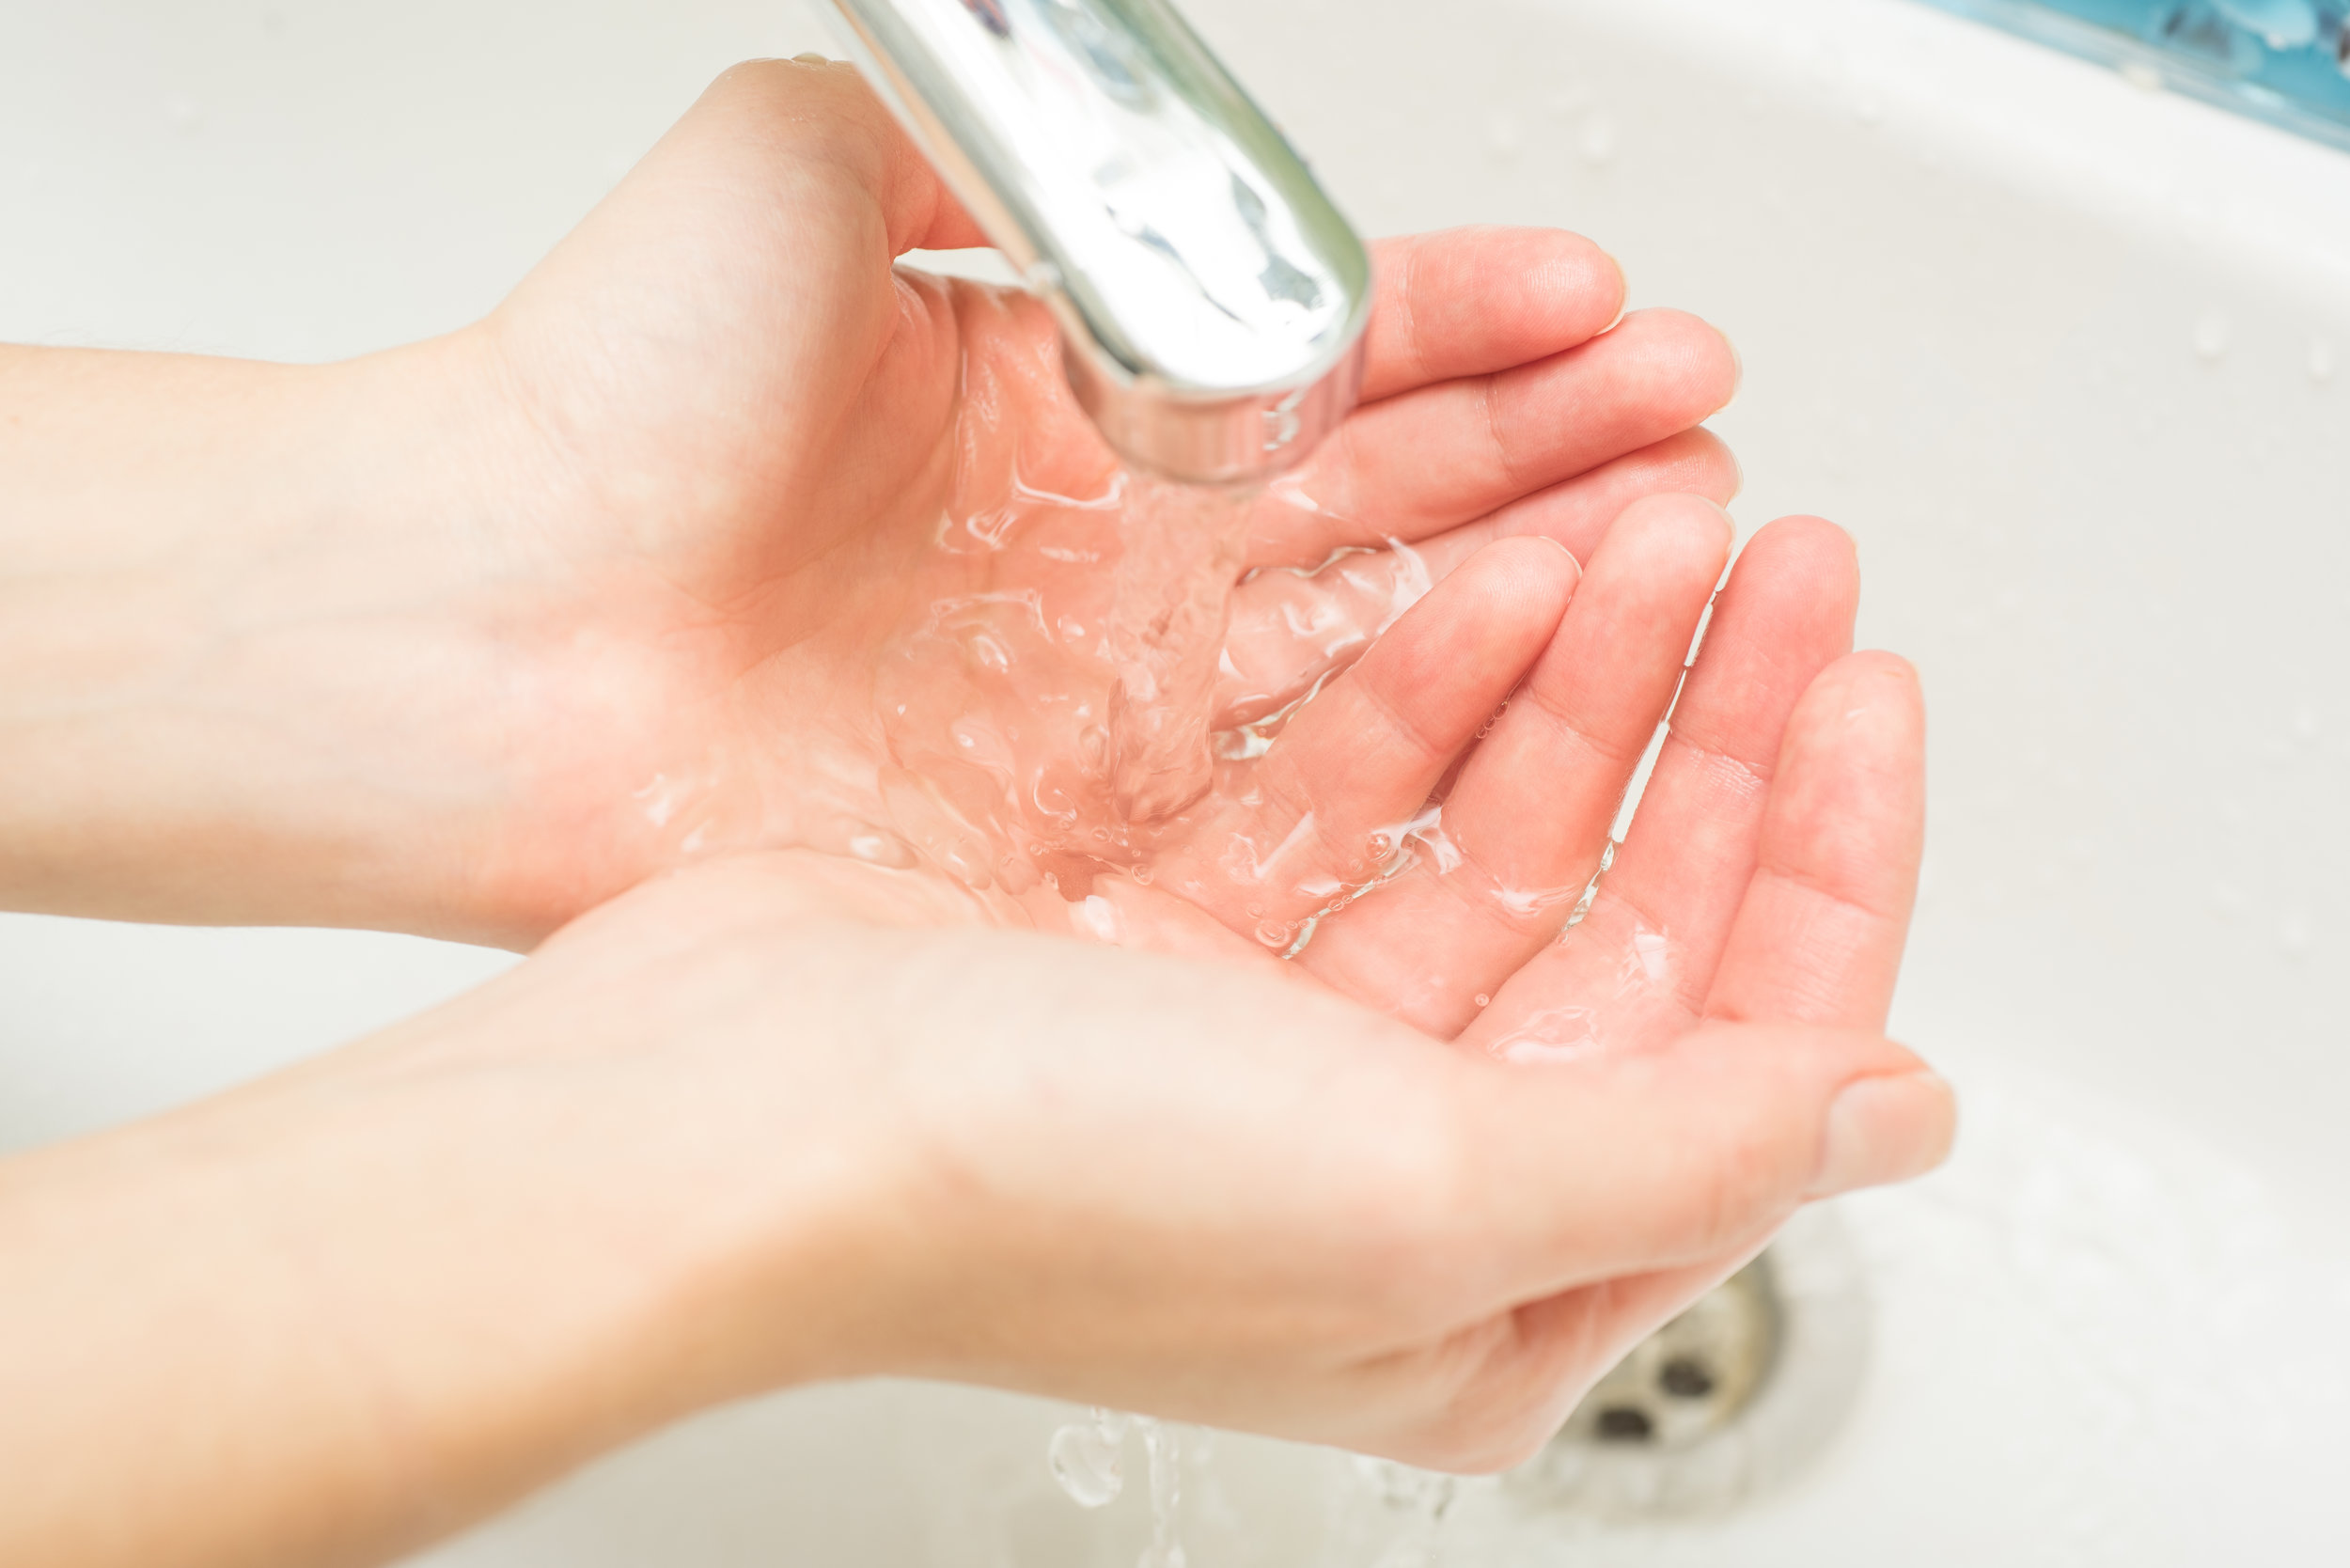 The Gold Standard of Hand Hygiene Compliance: Is 100% Worth the Cost?